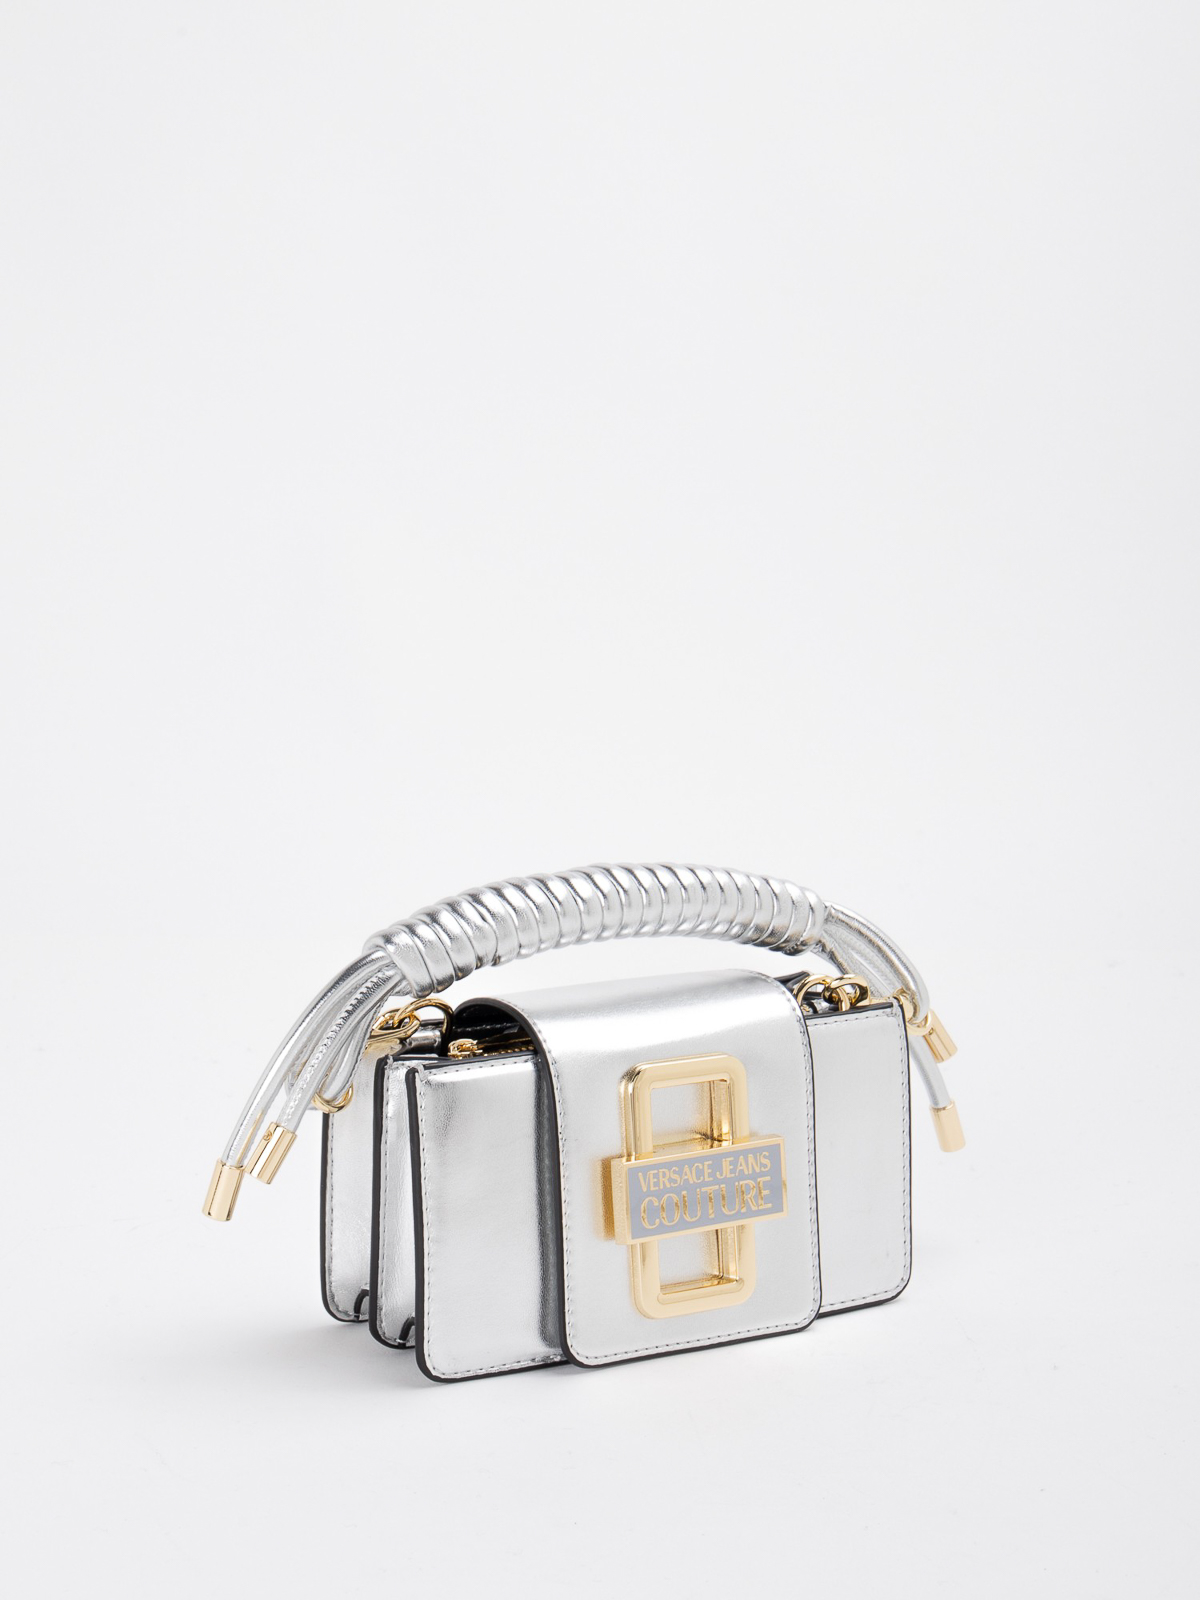 Versace Jeans Couture Couture I Crossbody Bag